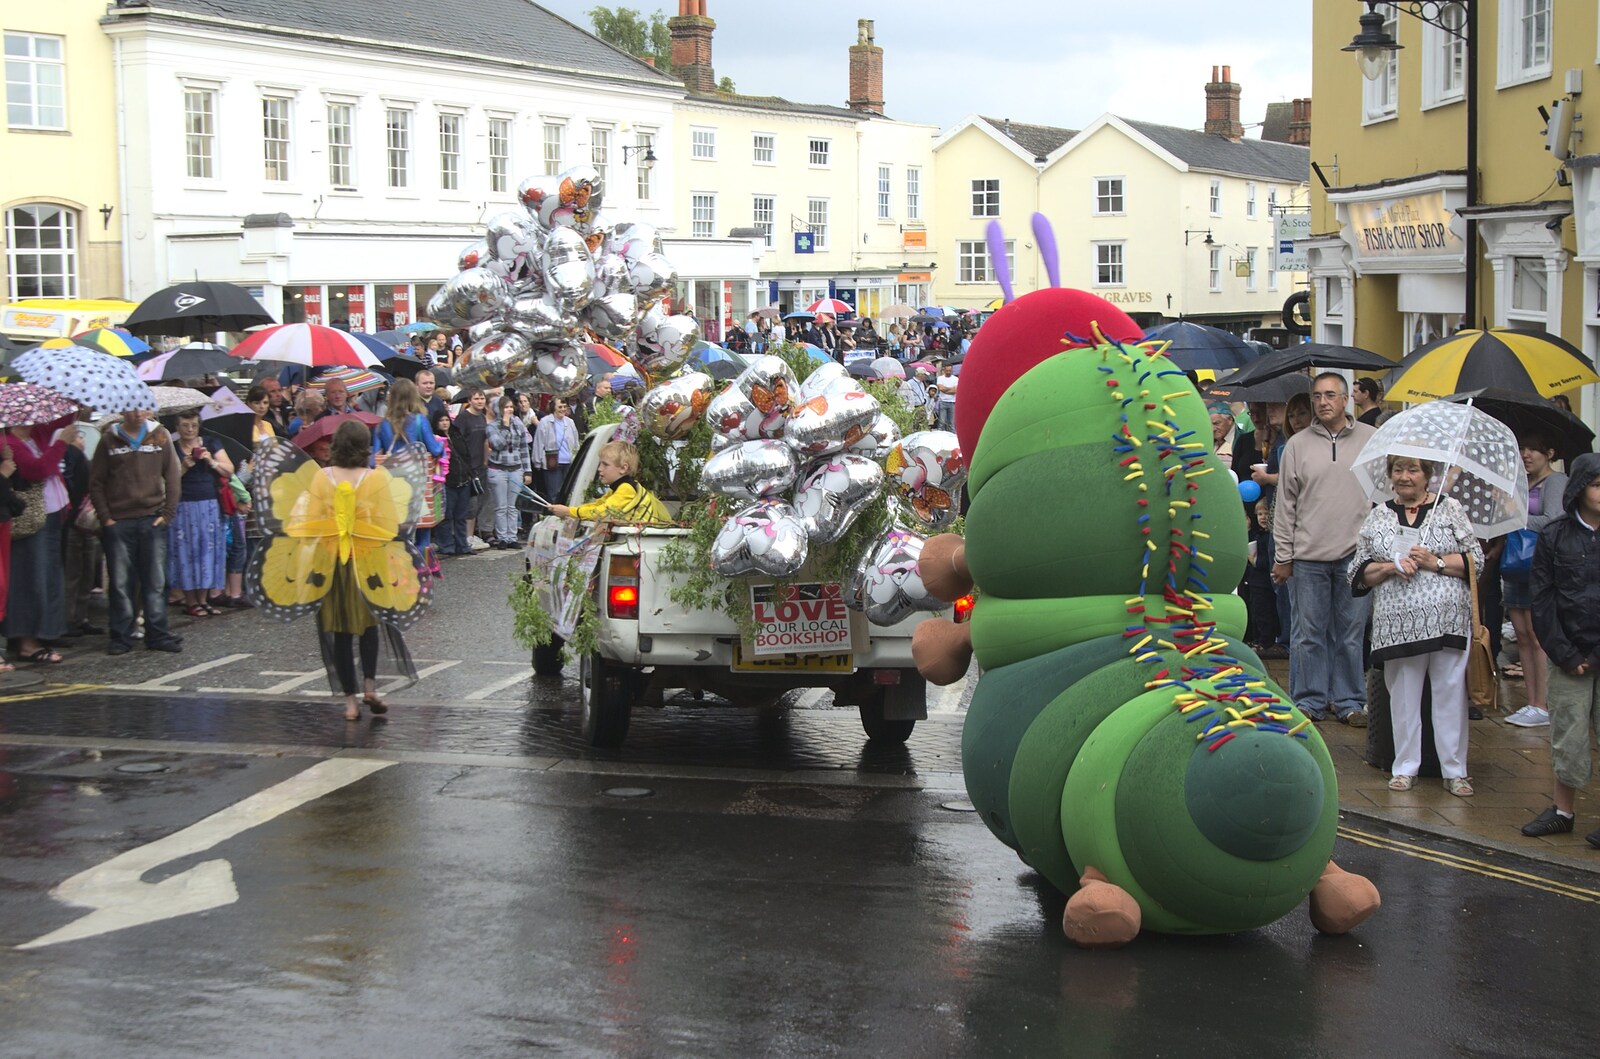 The hungry Caterpillar from Diss Carnival Procession, Diss, Norfolk - 21st June 2009